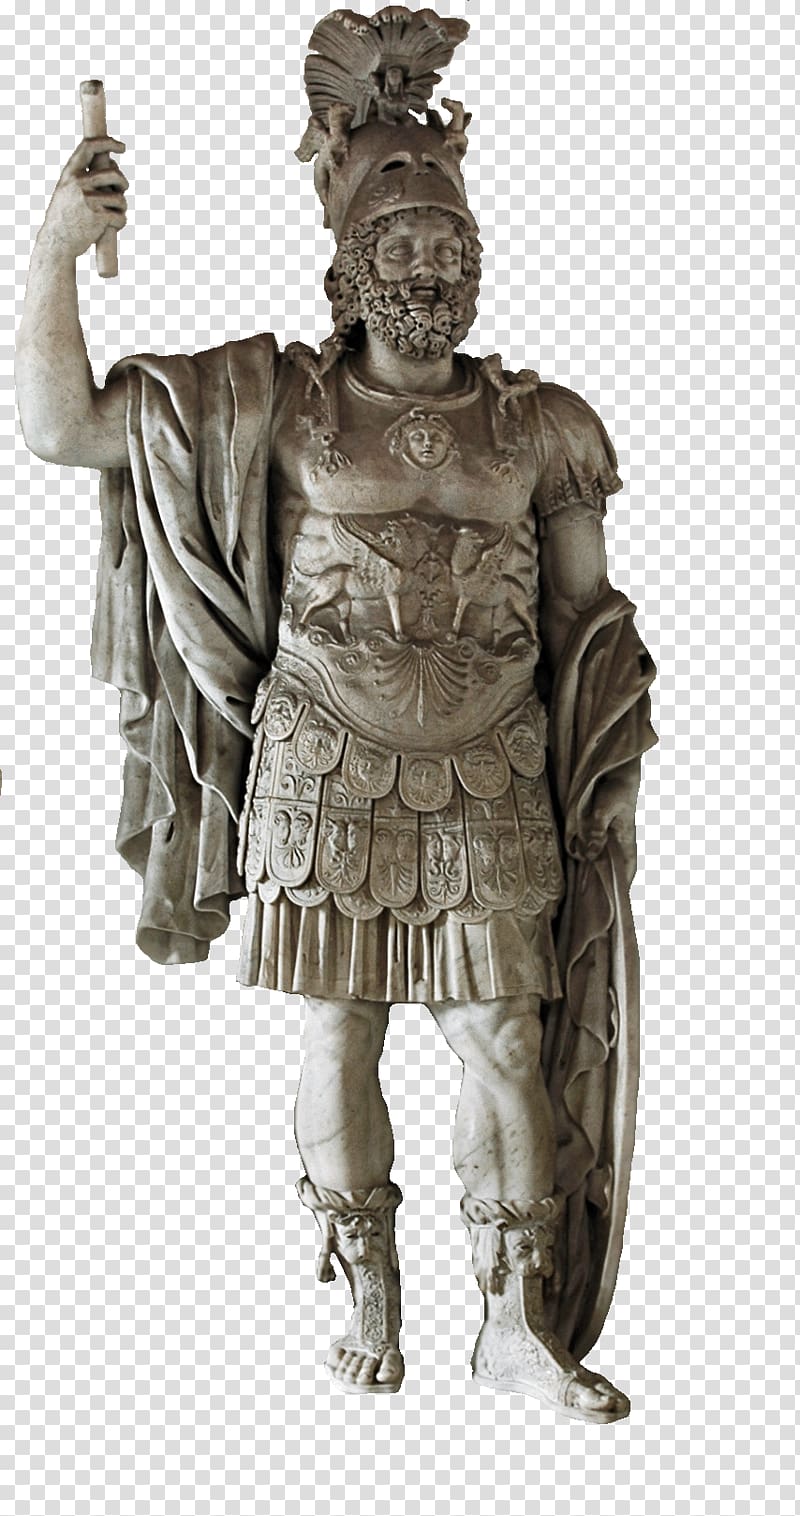 Free download | Ancient Rome Statue Ancient Greece Ancient history